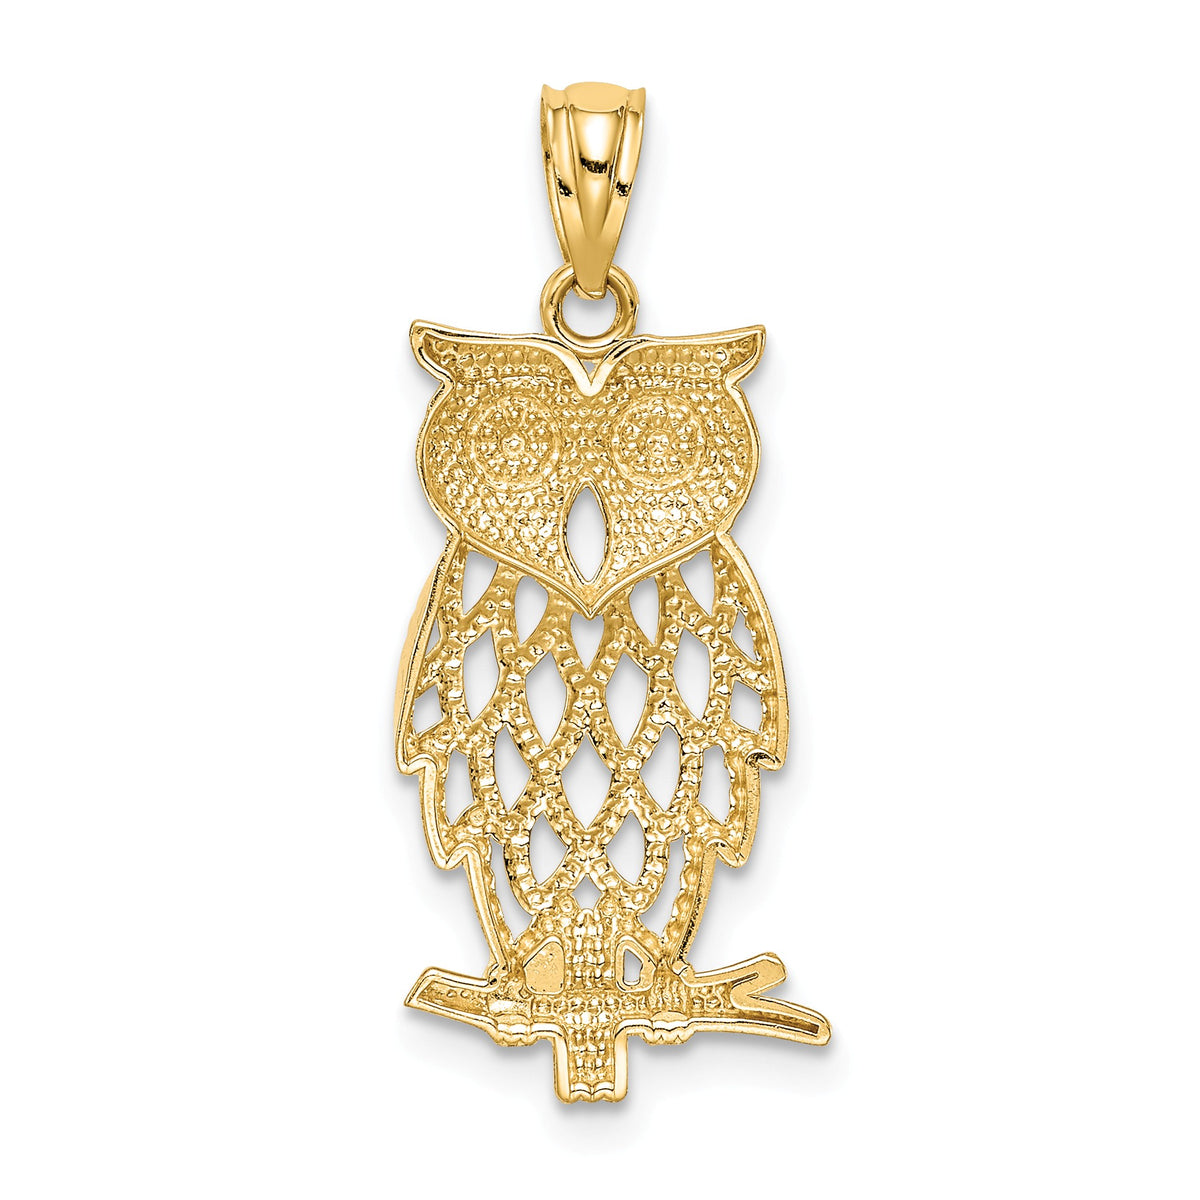 Alternate view of the 14k Yellow Gold and White Rhodium Two Tone Owl Pendant, 11 x 27mm by The Black Bow Jewelry Co.